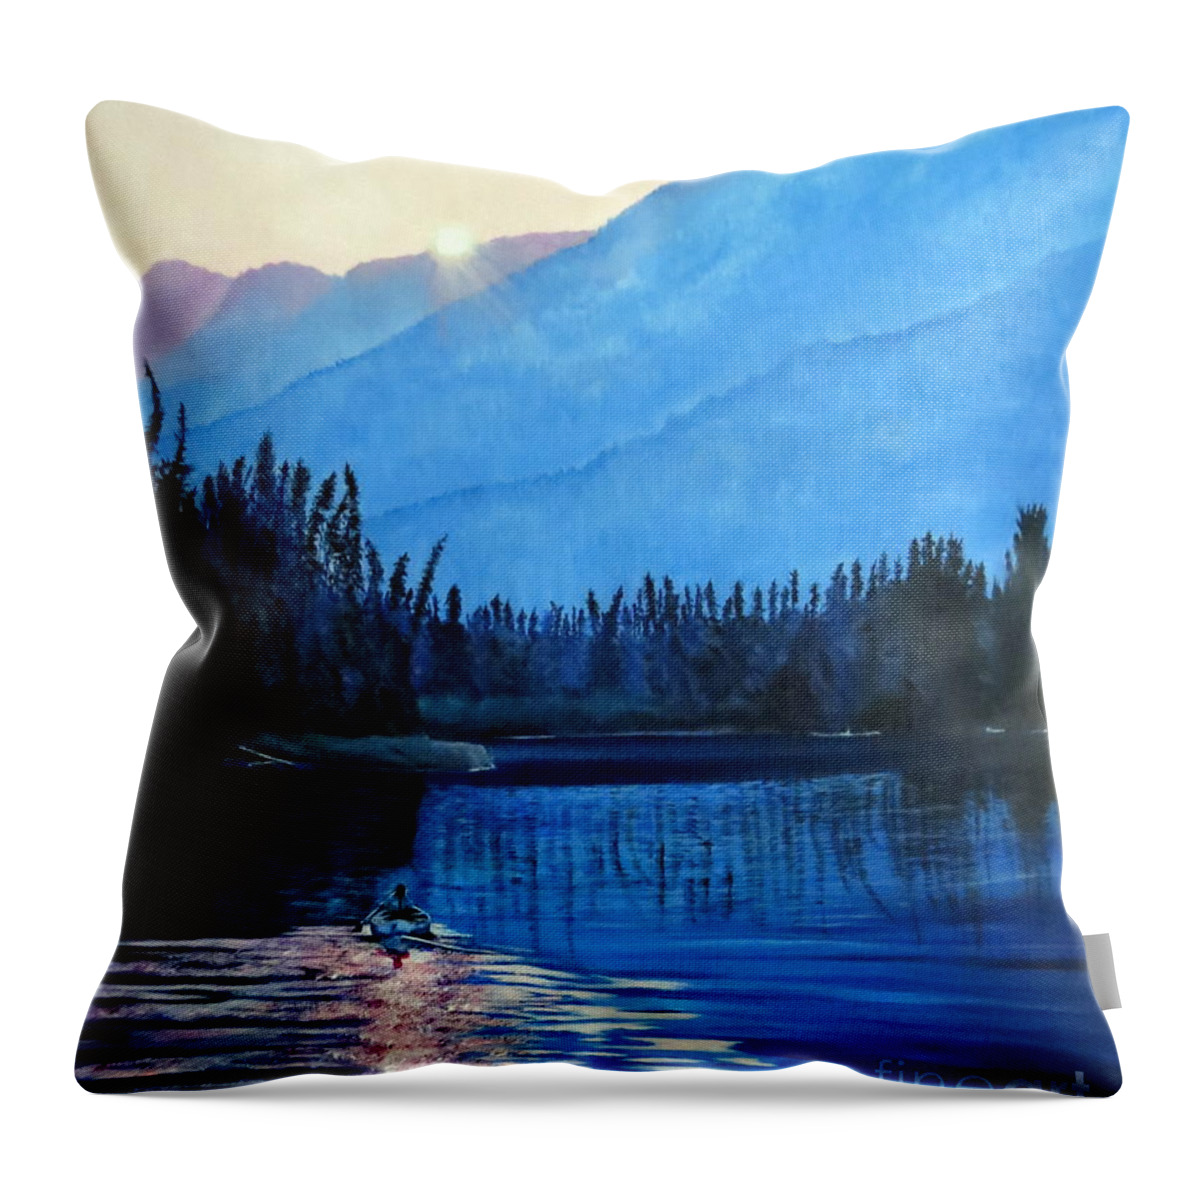 Banff Throw Pillow featuring the painting Nature Feels by Marilyn McNish